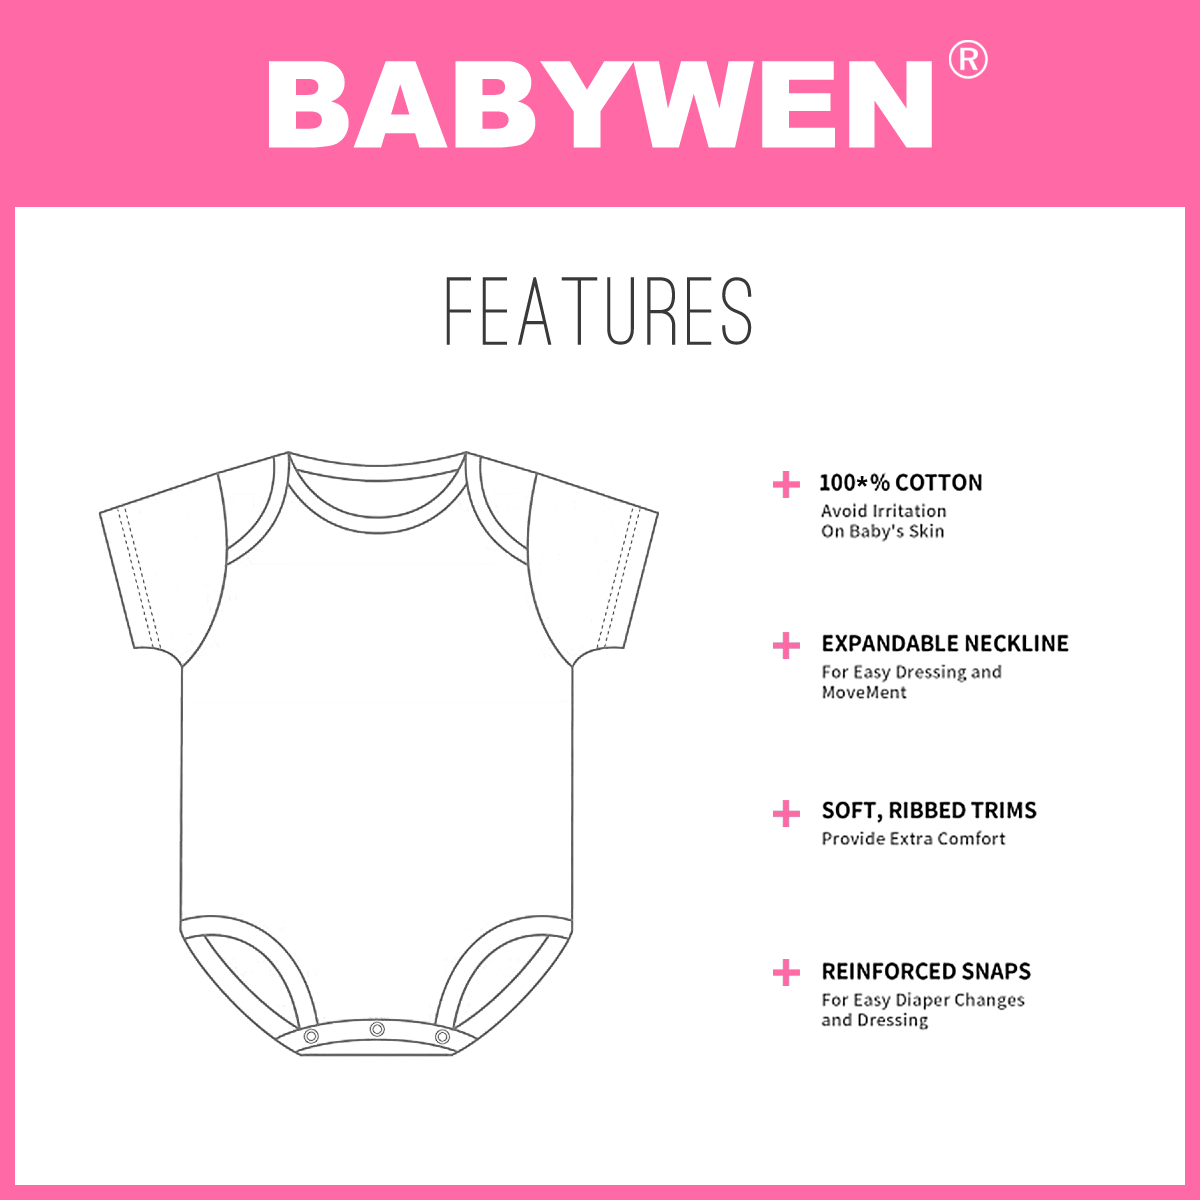 Twin Babys Funny Ctrl + C Ctrl + V Printed Infant Baby Cotton Bodysuits (White, 0-3M) - image 5 of 5